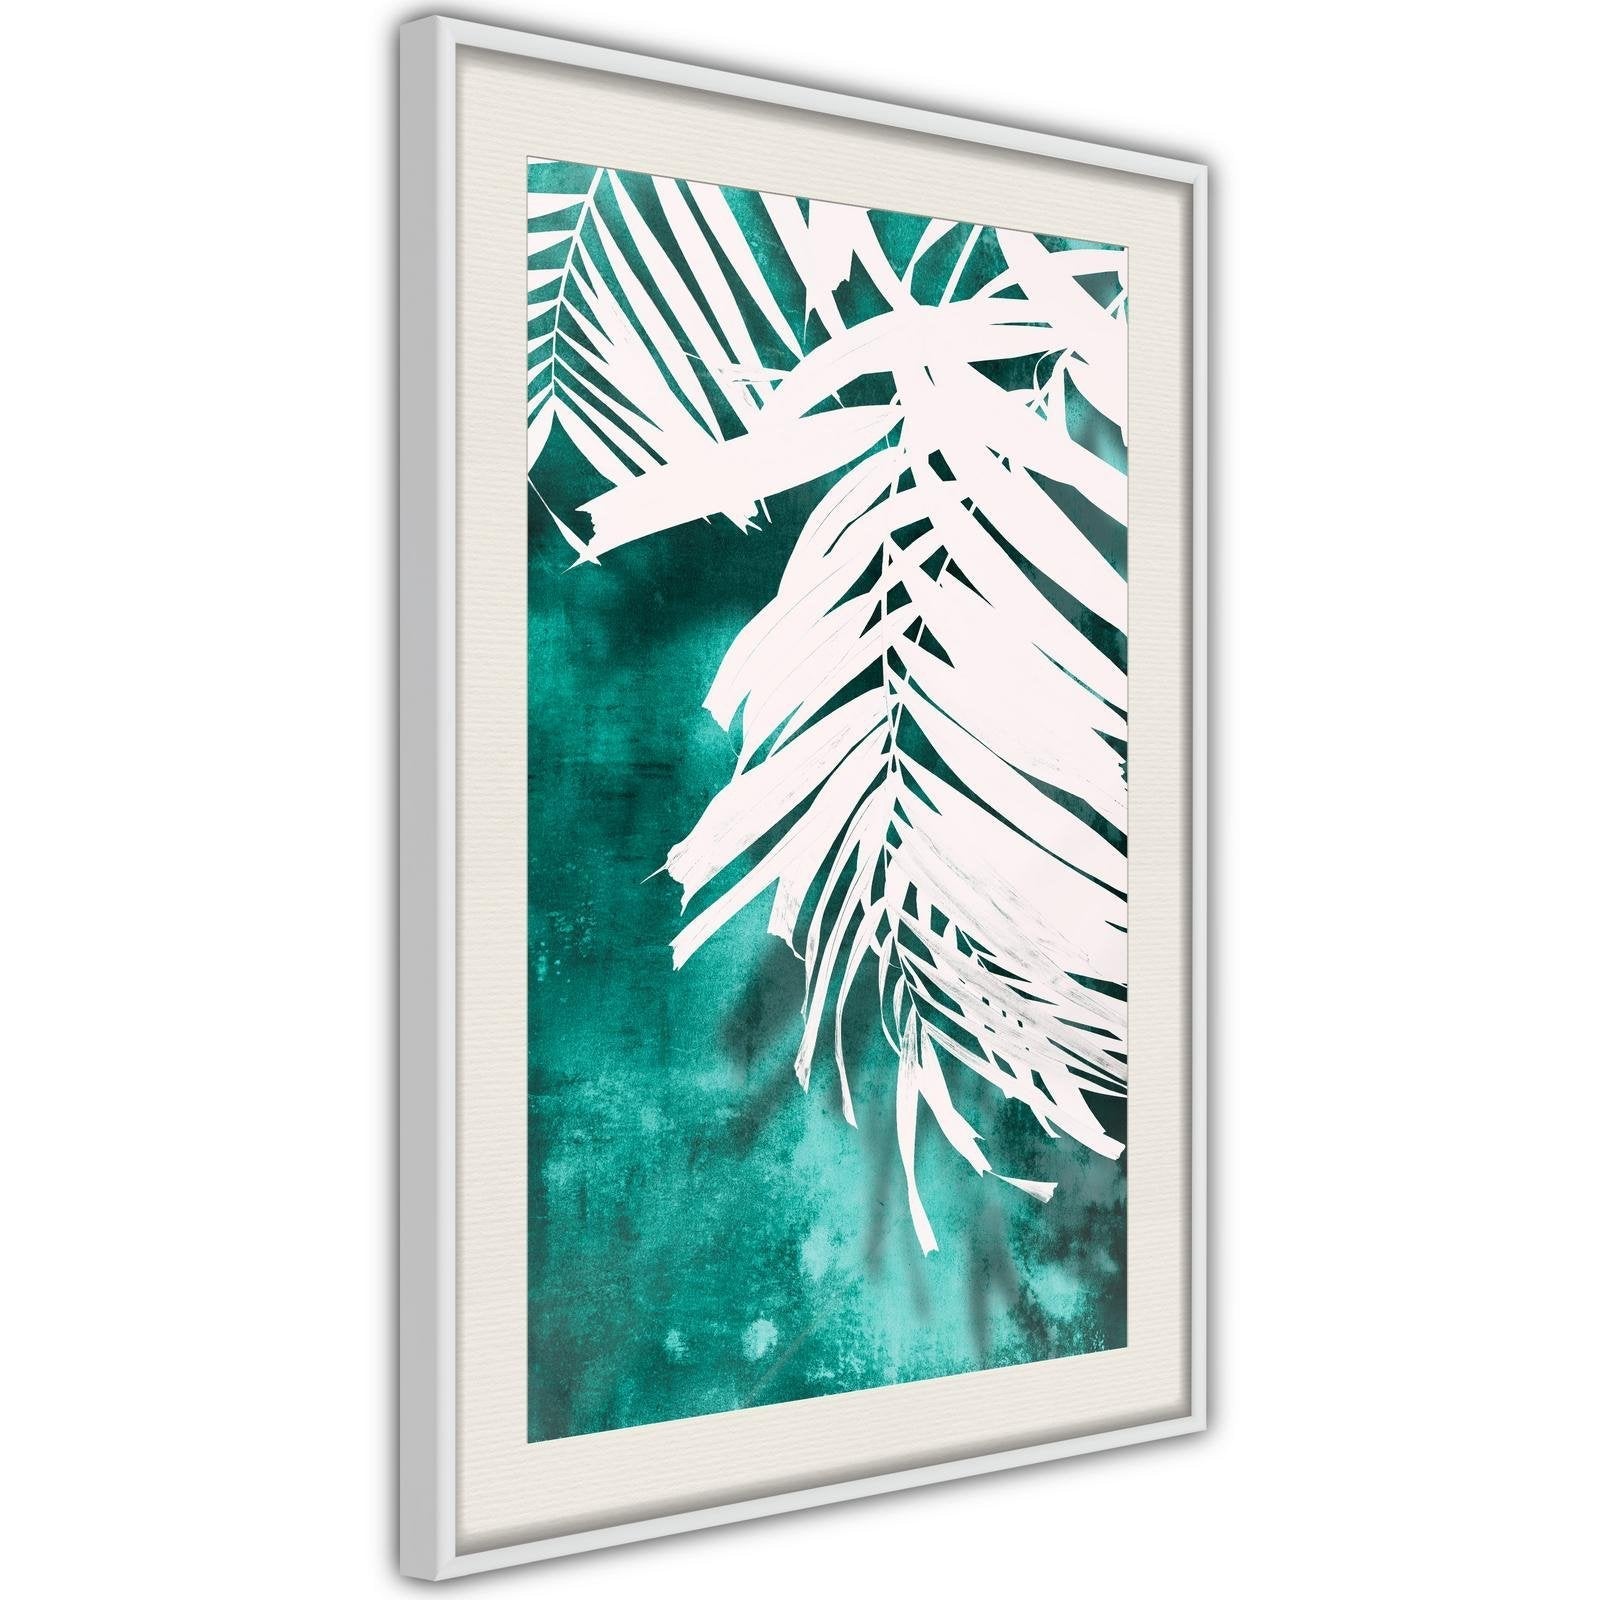 Inramad Poster / Tavla - White Palm on Teal Background-Poster Inramad-Artgeist-peaceofhome.se